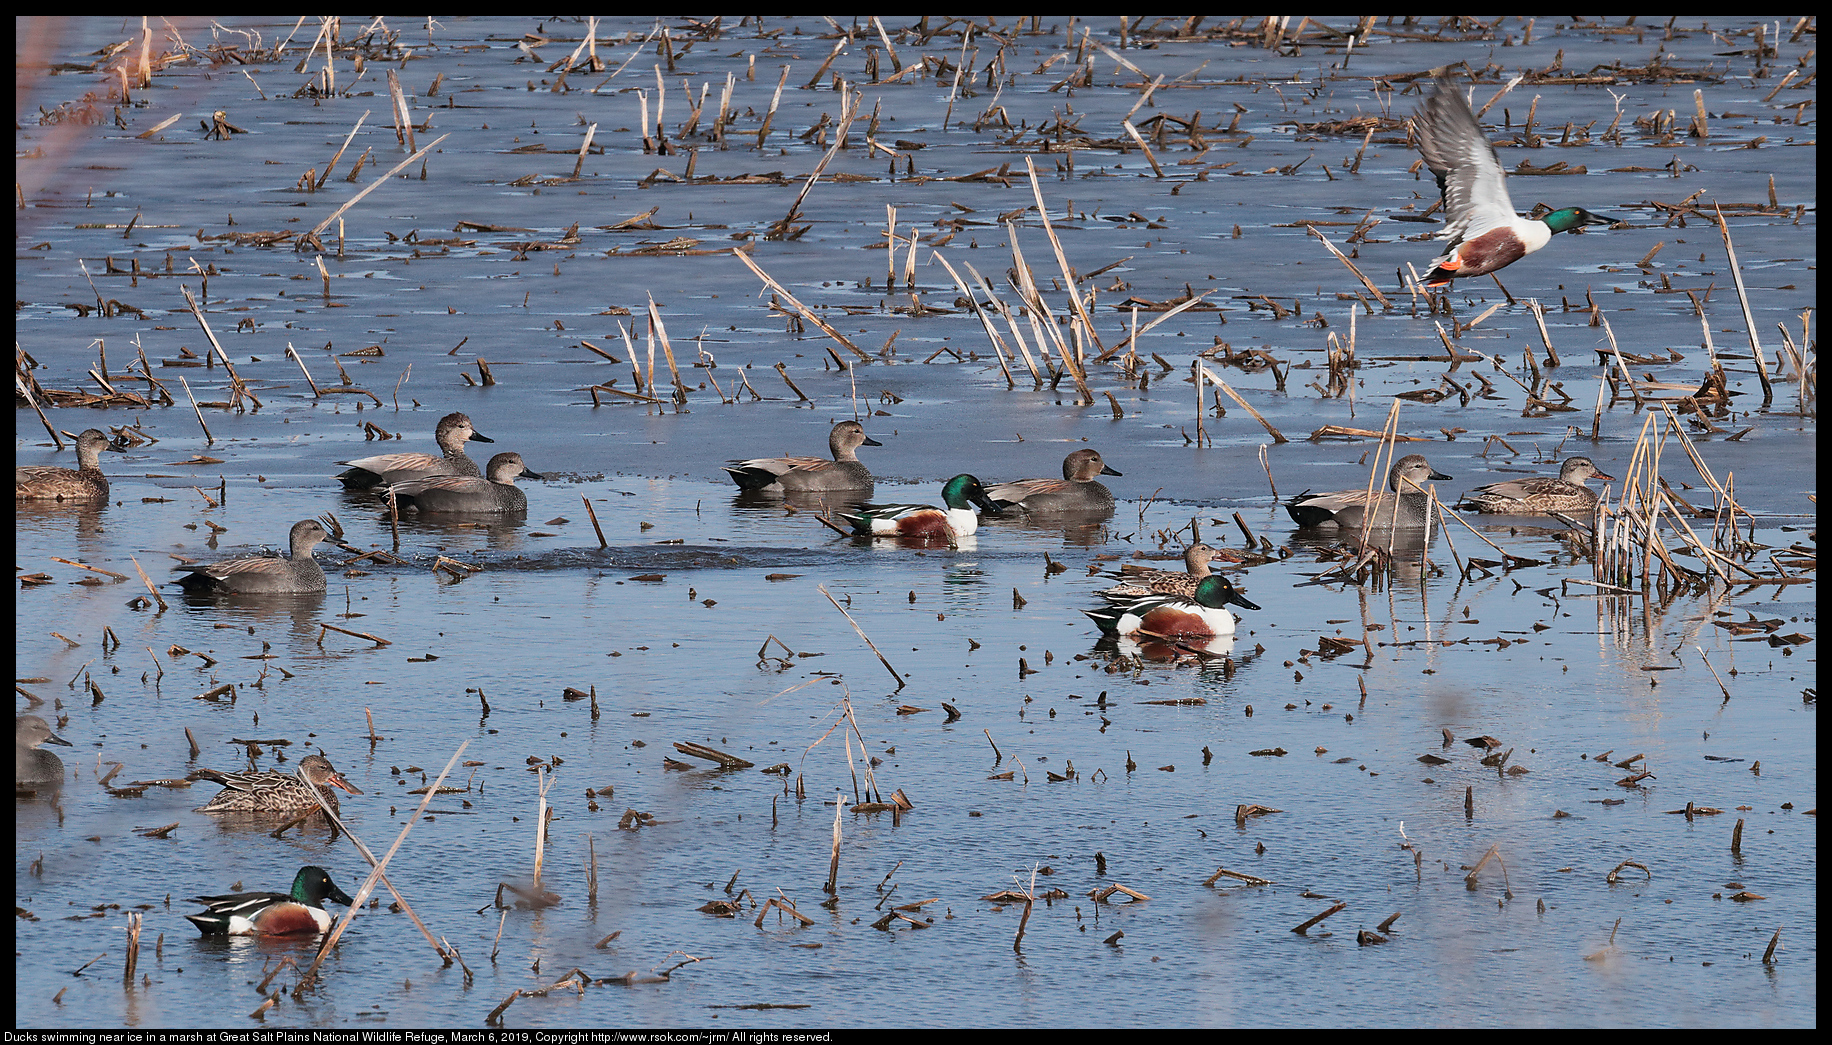 Ducks swimming near ice in a marsh at Great Salt Plains National Wildlife Refuge, March 6, 2019